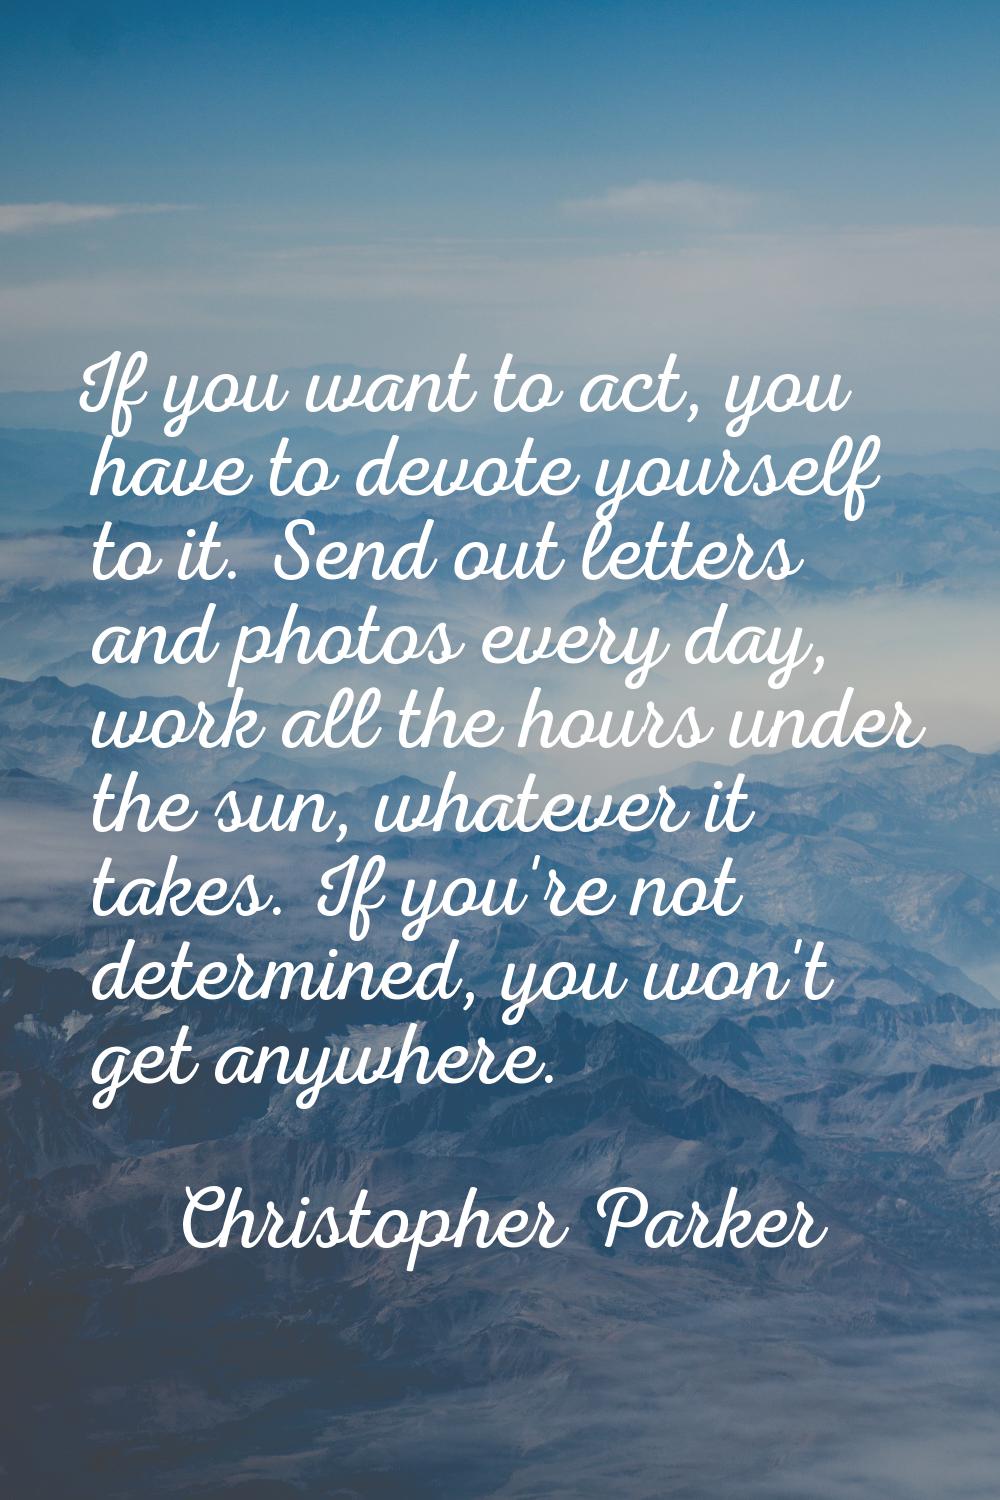 If you want to act, you have to devote yourself to it. Send out letters and photos every day, work 